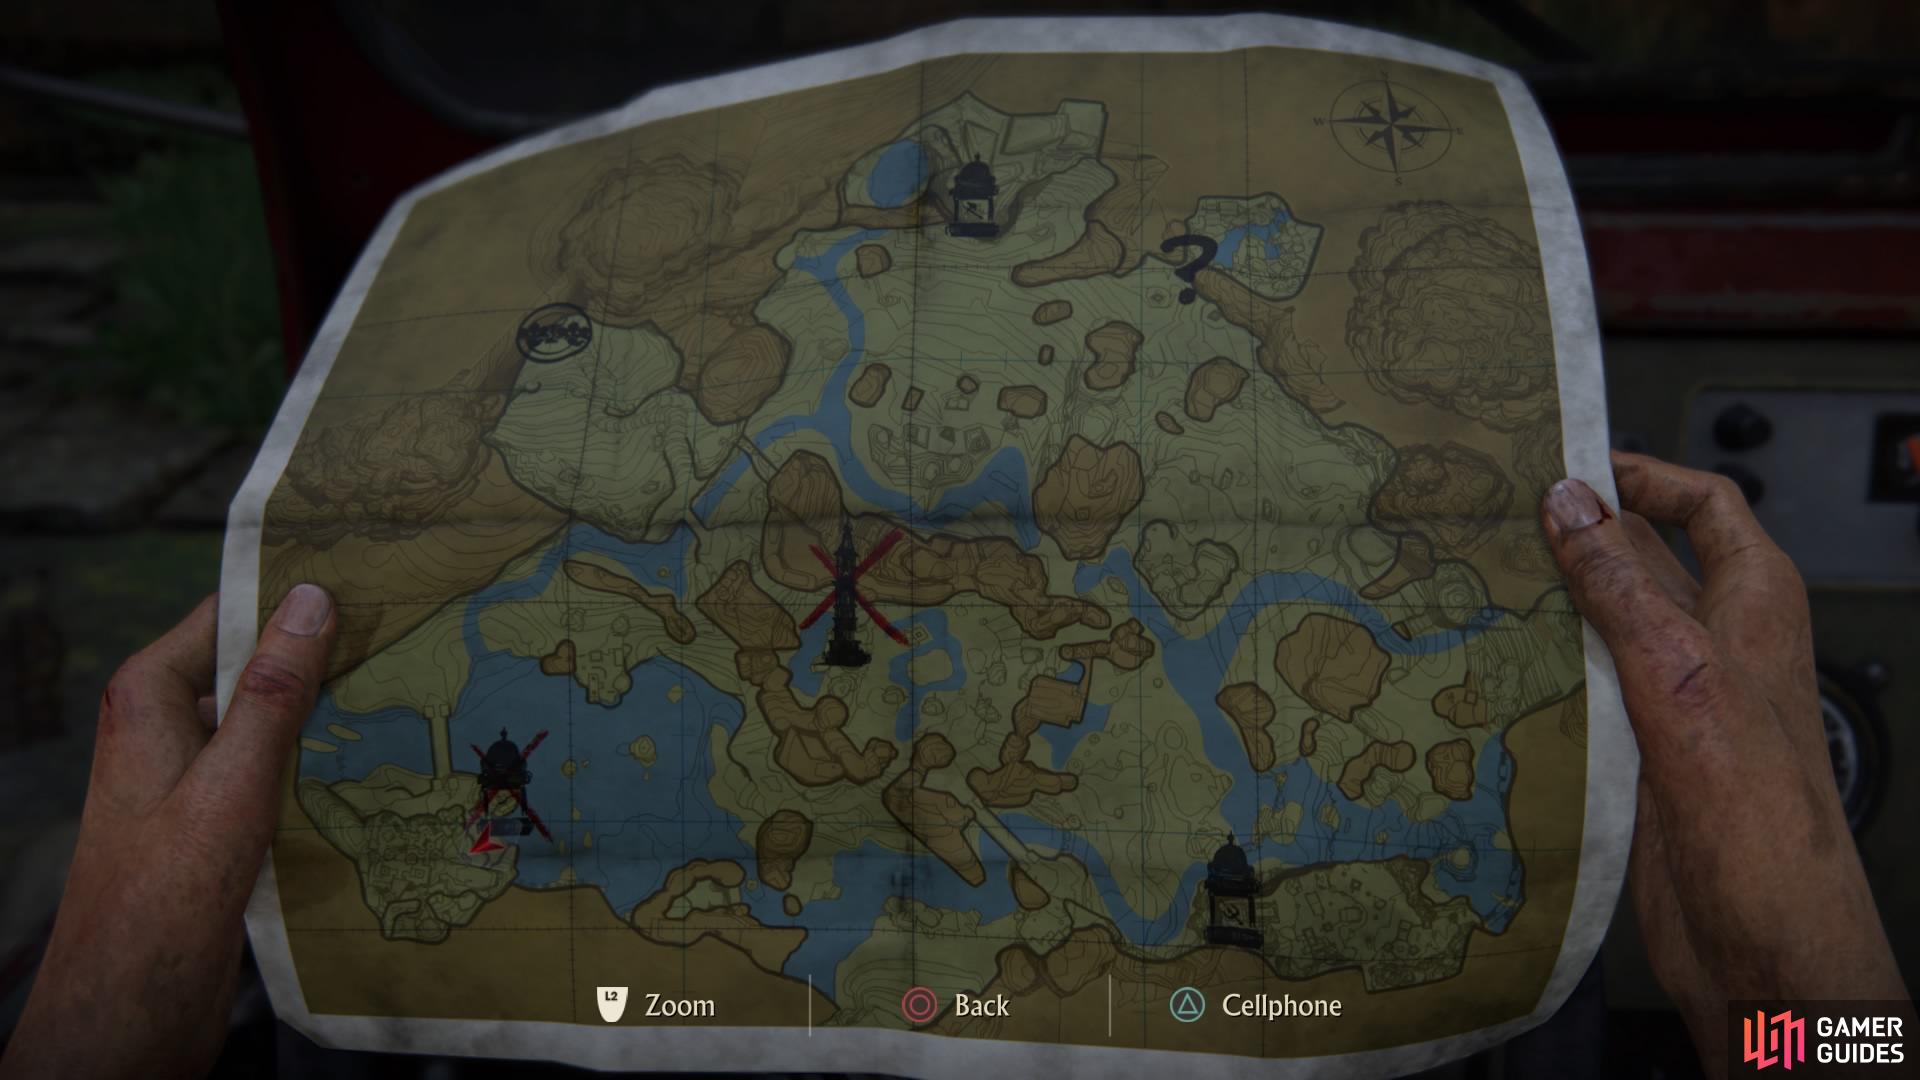 Chloe will update the map to mark your progress